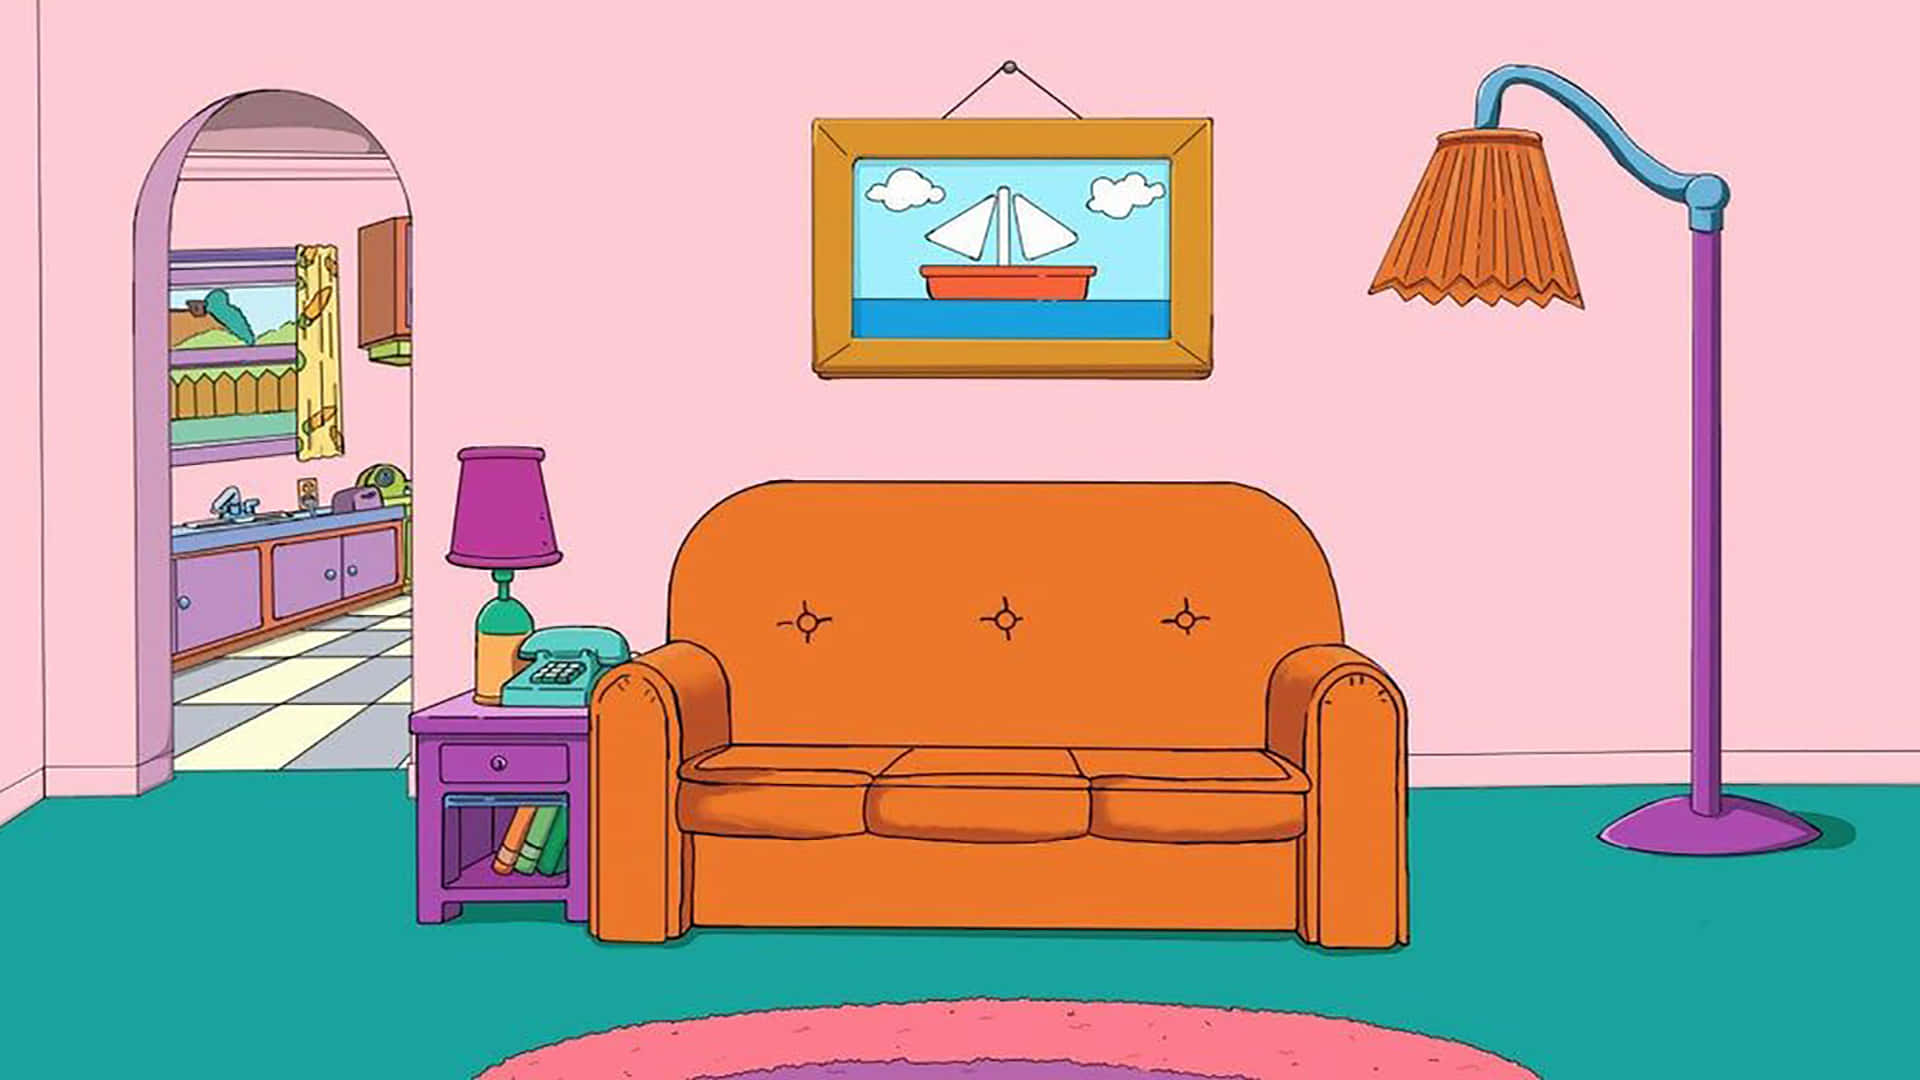 A Cartoon Room With A Couch And A Lamp